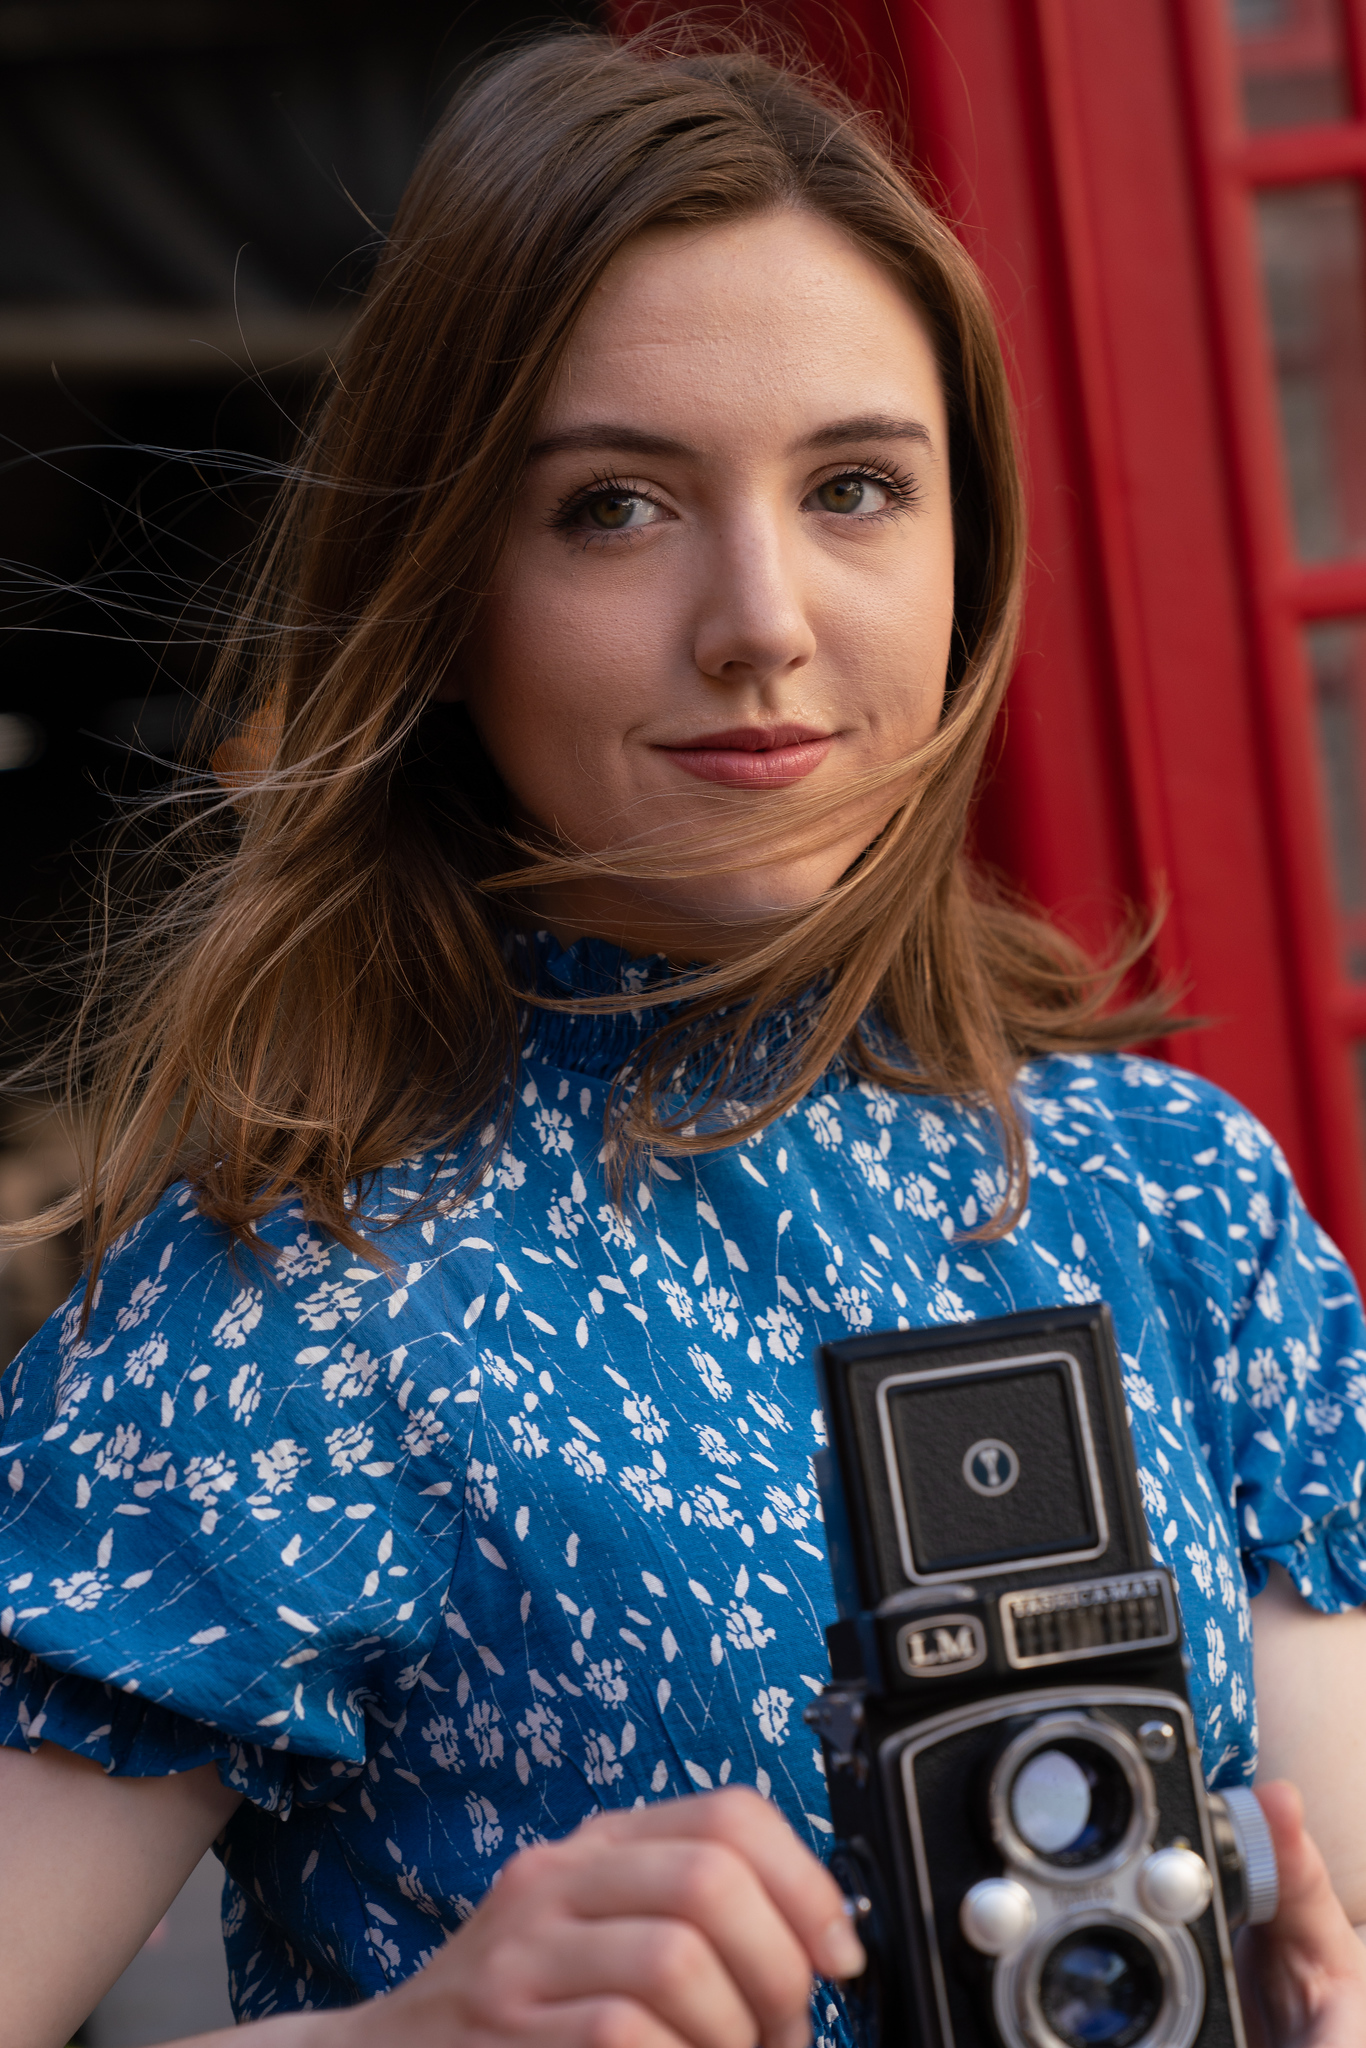 A young woman in a blue dress poses with a vintage camera